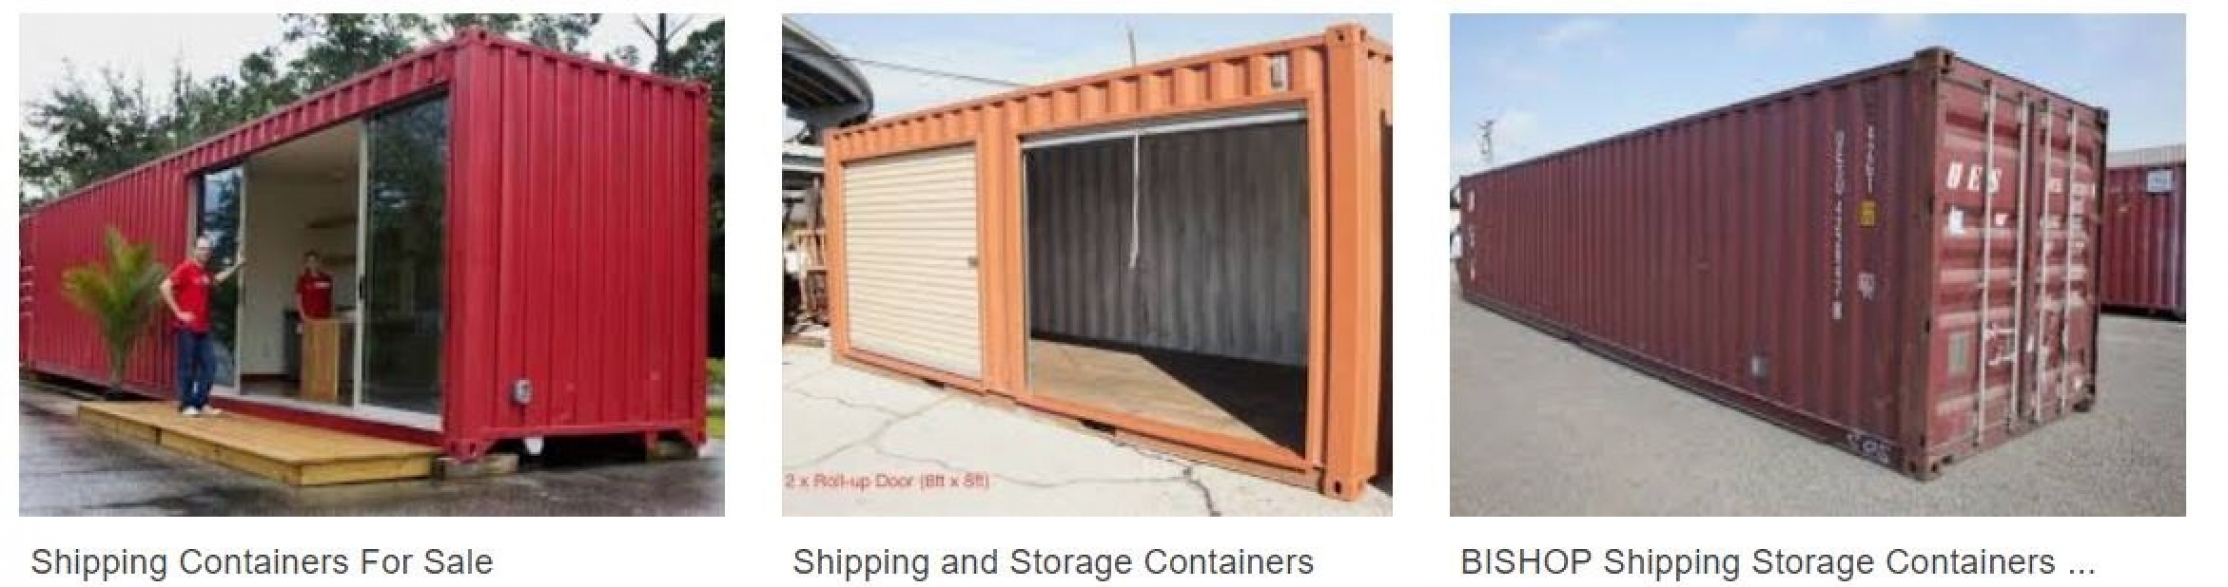 gallery/buy a shipping container2